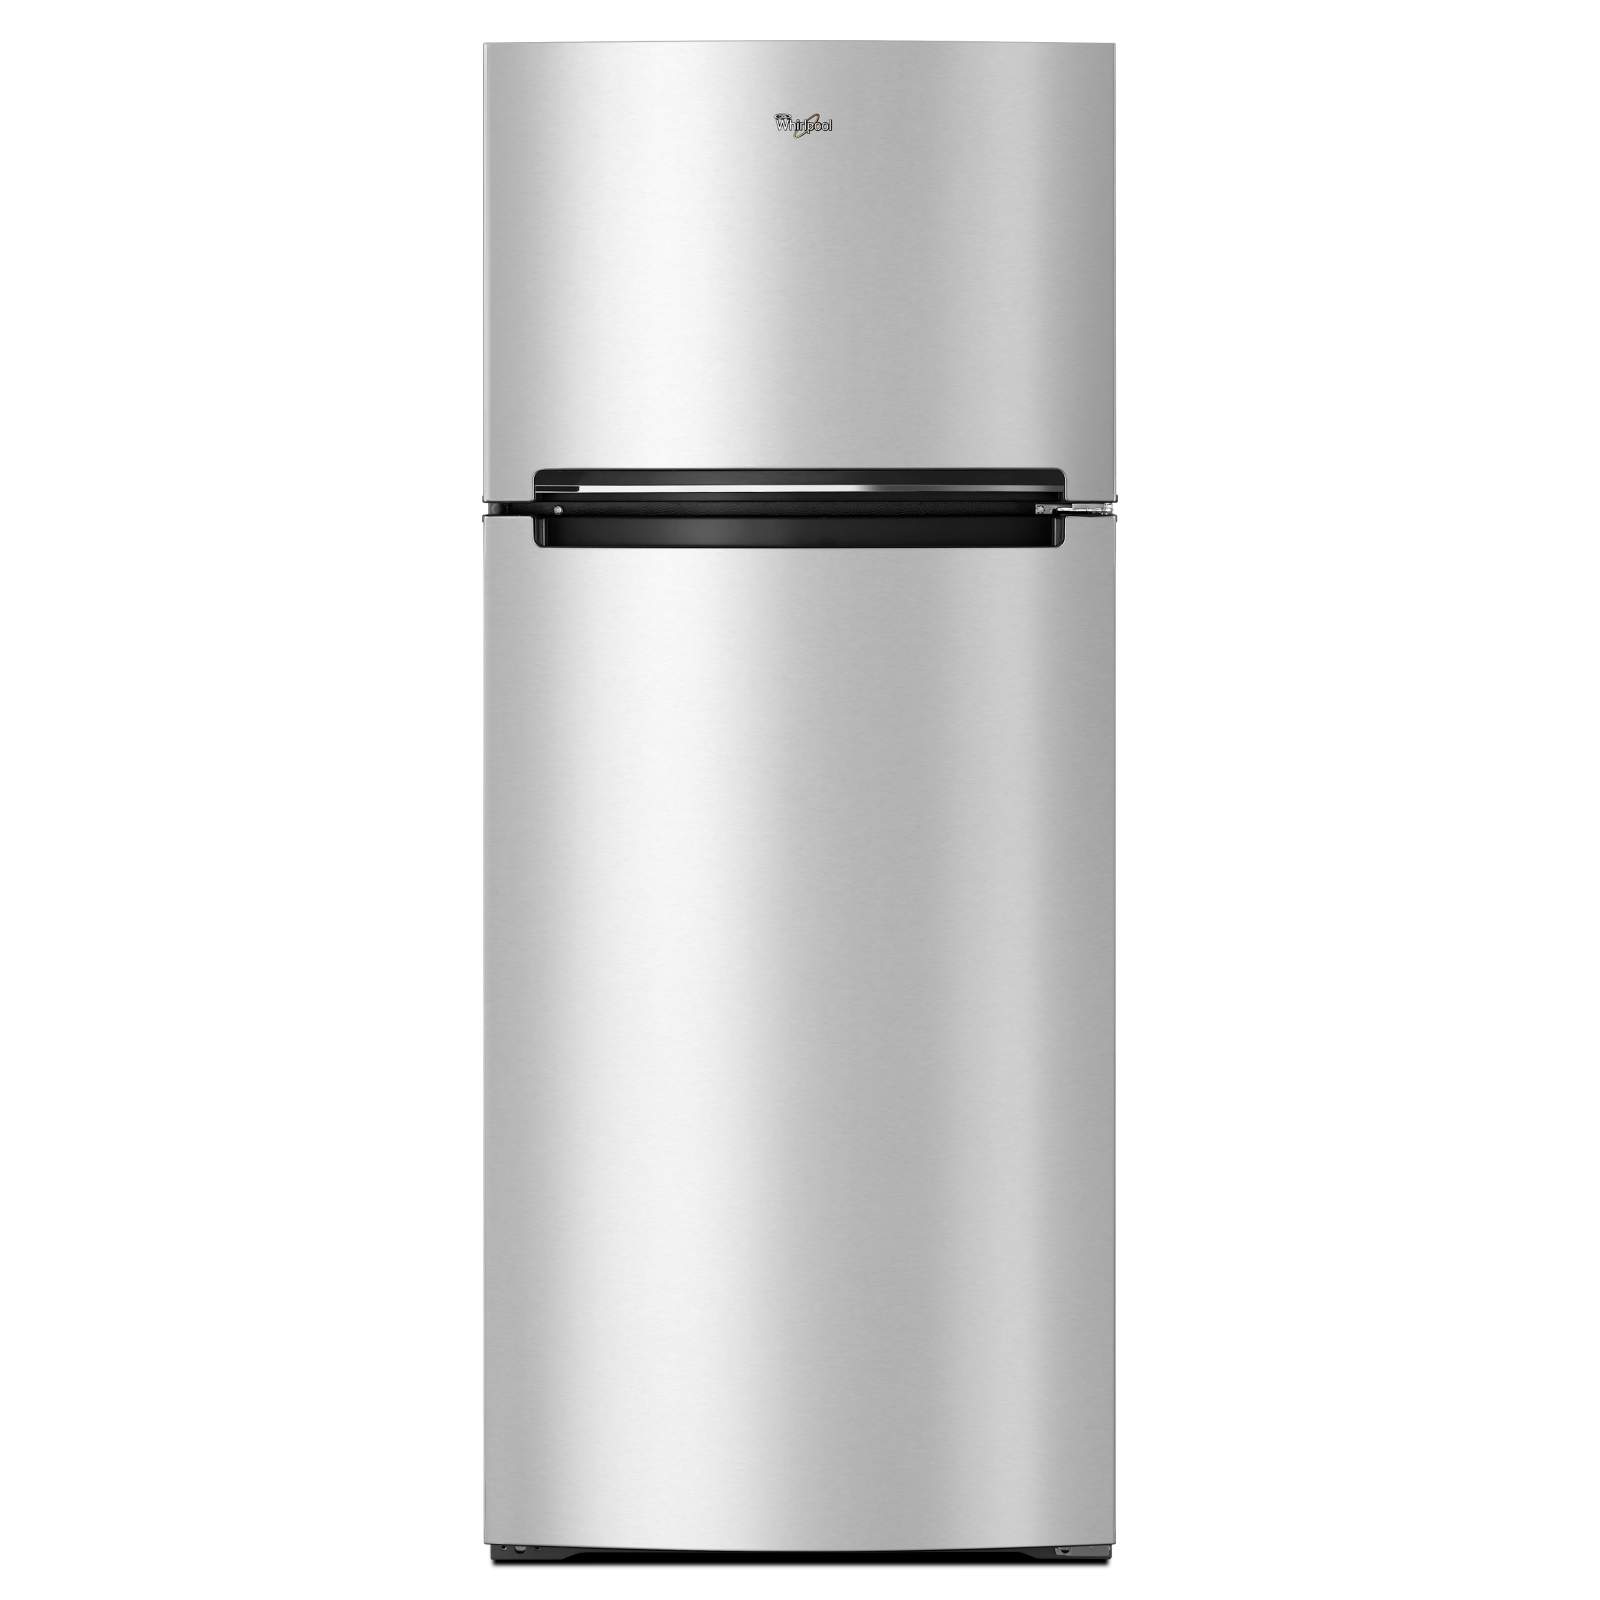 Whirlpool - 28 Inch 17.64 cu. ft Top Mount Refrigerator in Stainless - WRT518SZFM